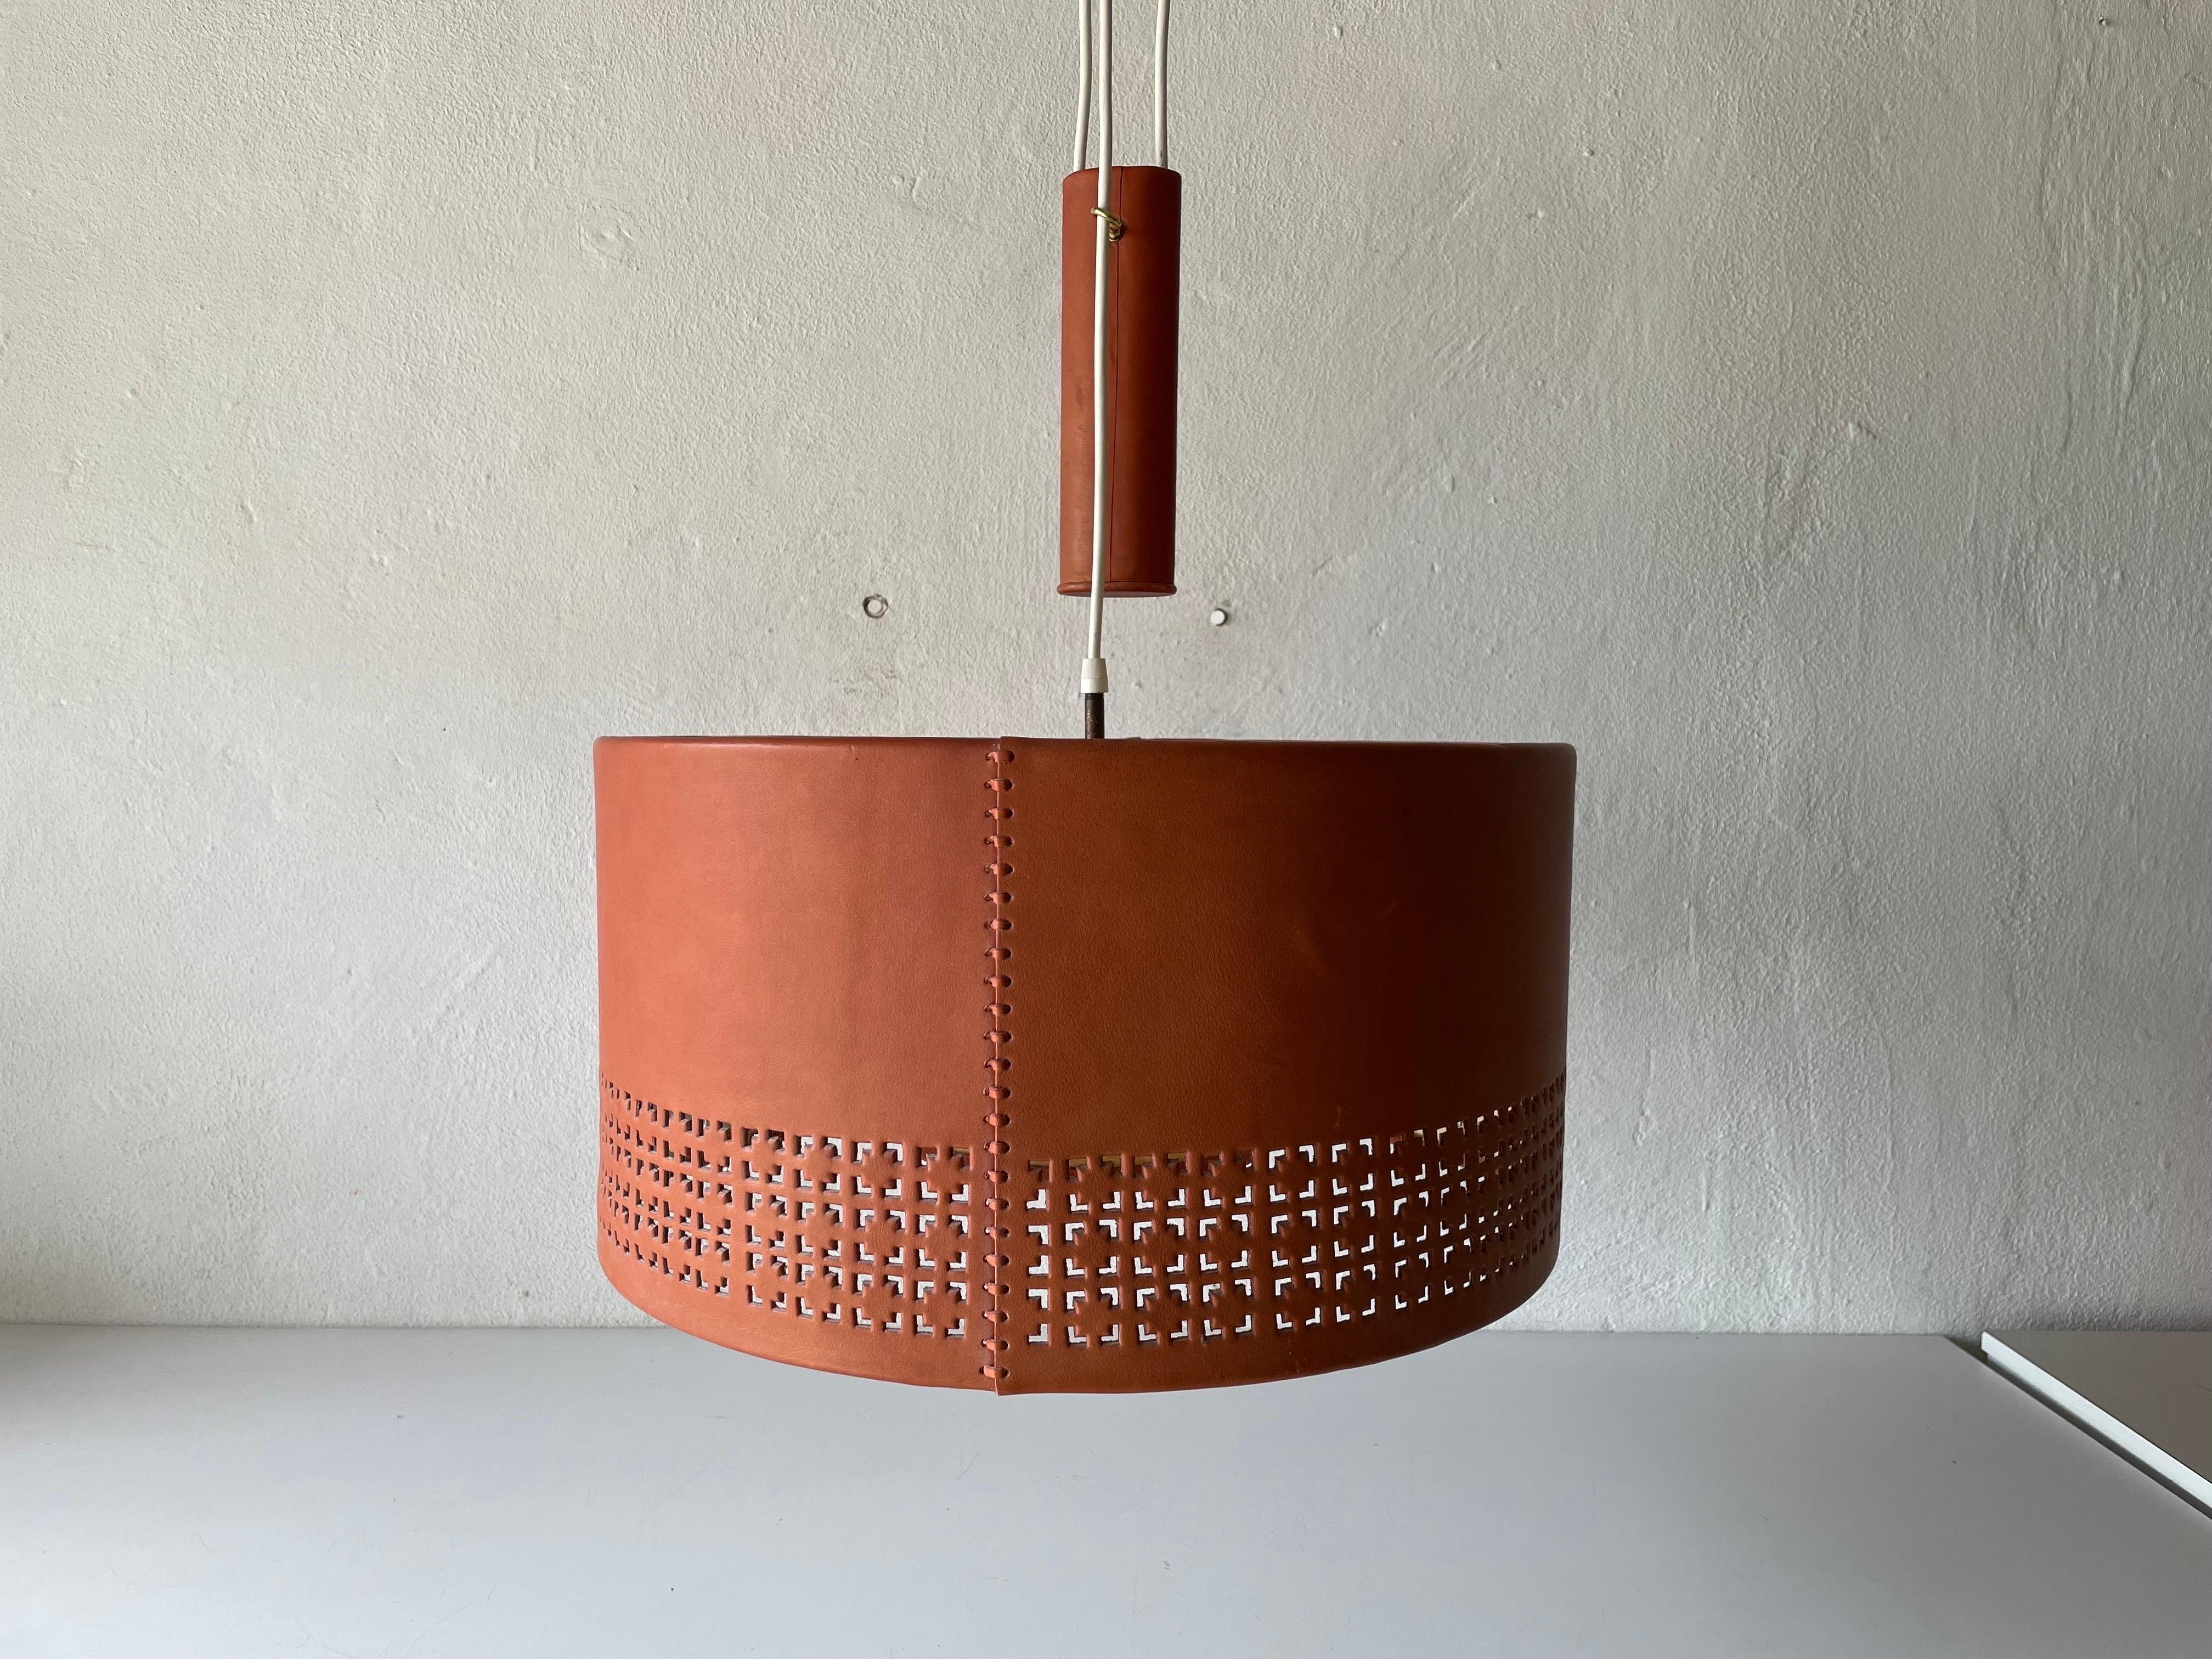 Mid-Century Modern Cylindrical Leather Shade with Motifs Counterweight Pendant Lamp, 1960s, Germany For Sale